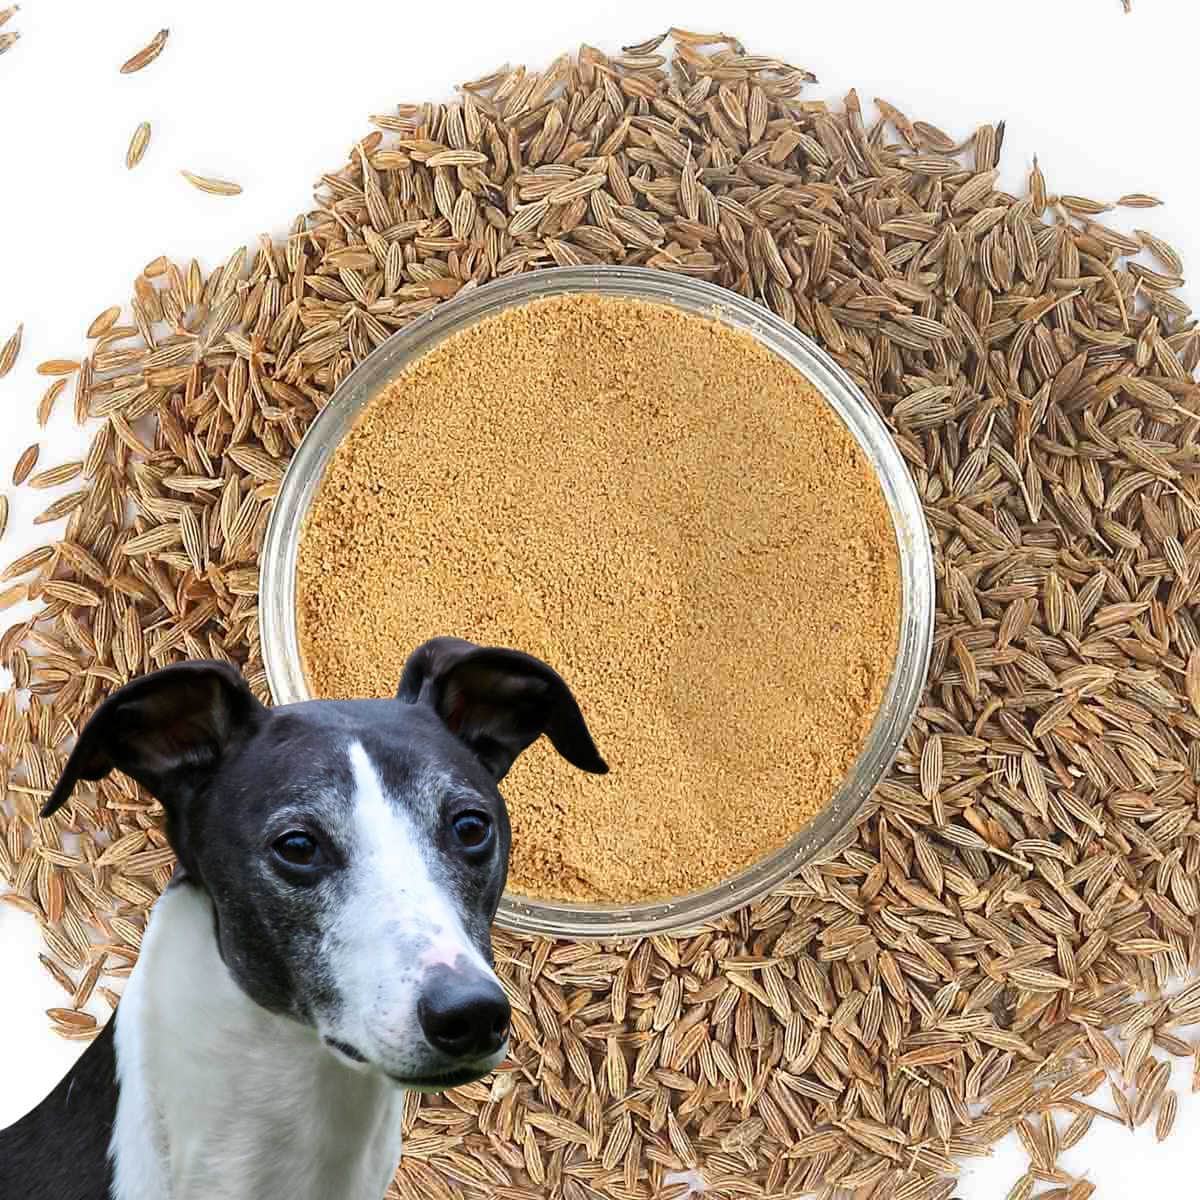 Whippet dog in front of ground cumin powder and seeds.